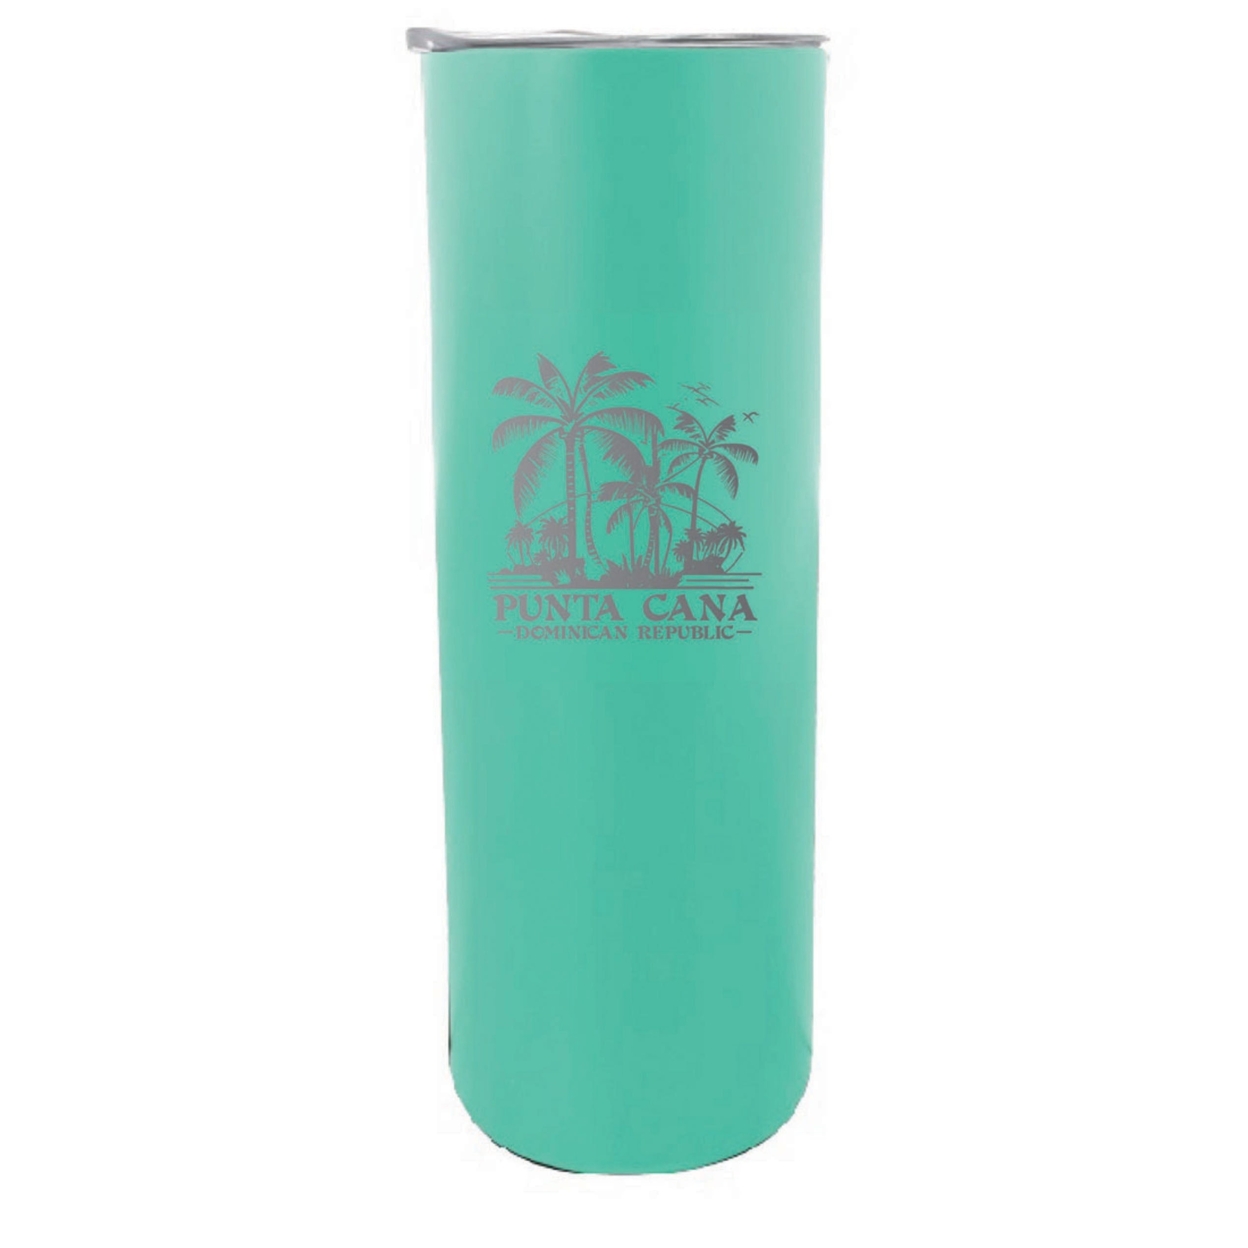 Punta Cana Dominican Republic Souvenir 20 Oz Insulated Stainless Steel Skinny Tumbler Etched - Rainbow Glitter Black, PALM BEACH